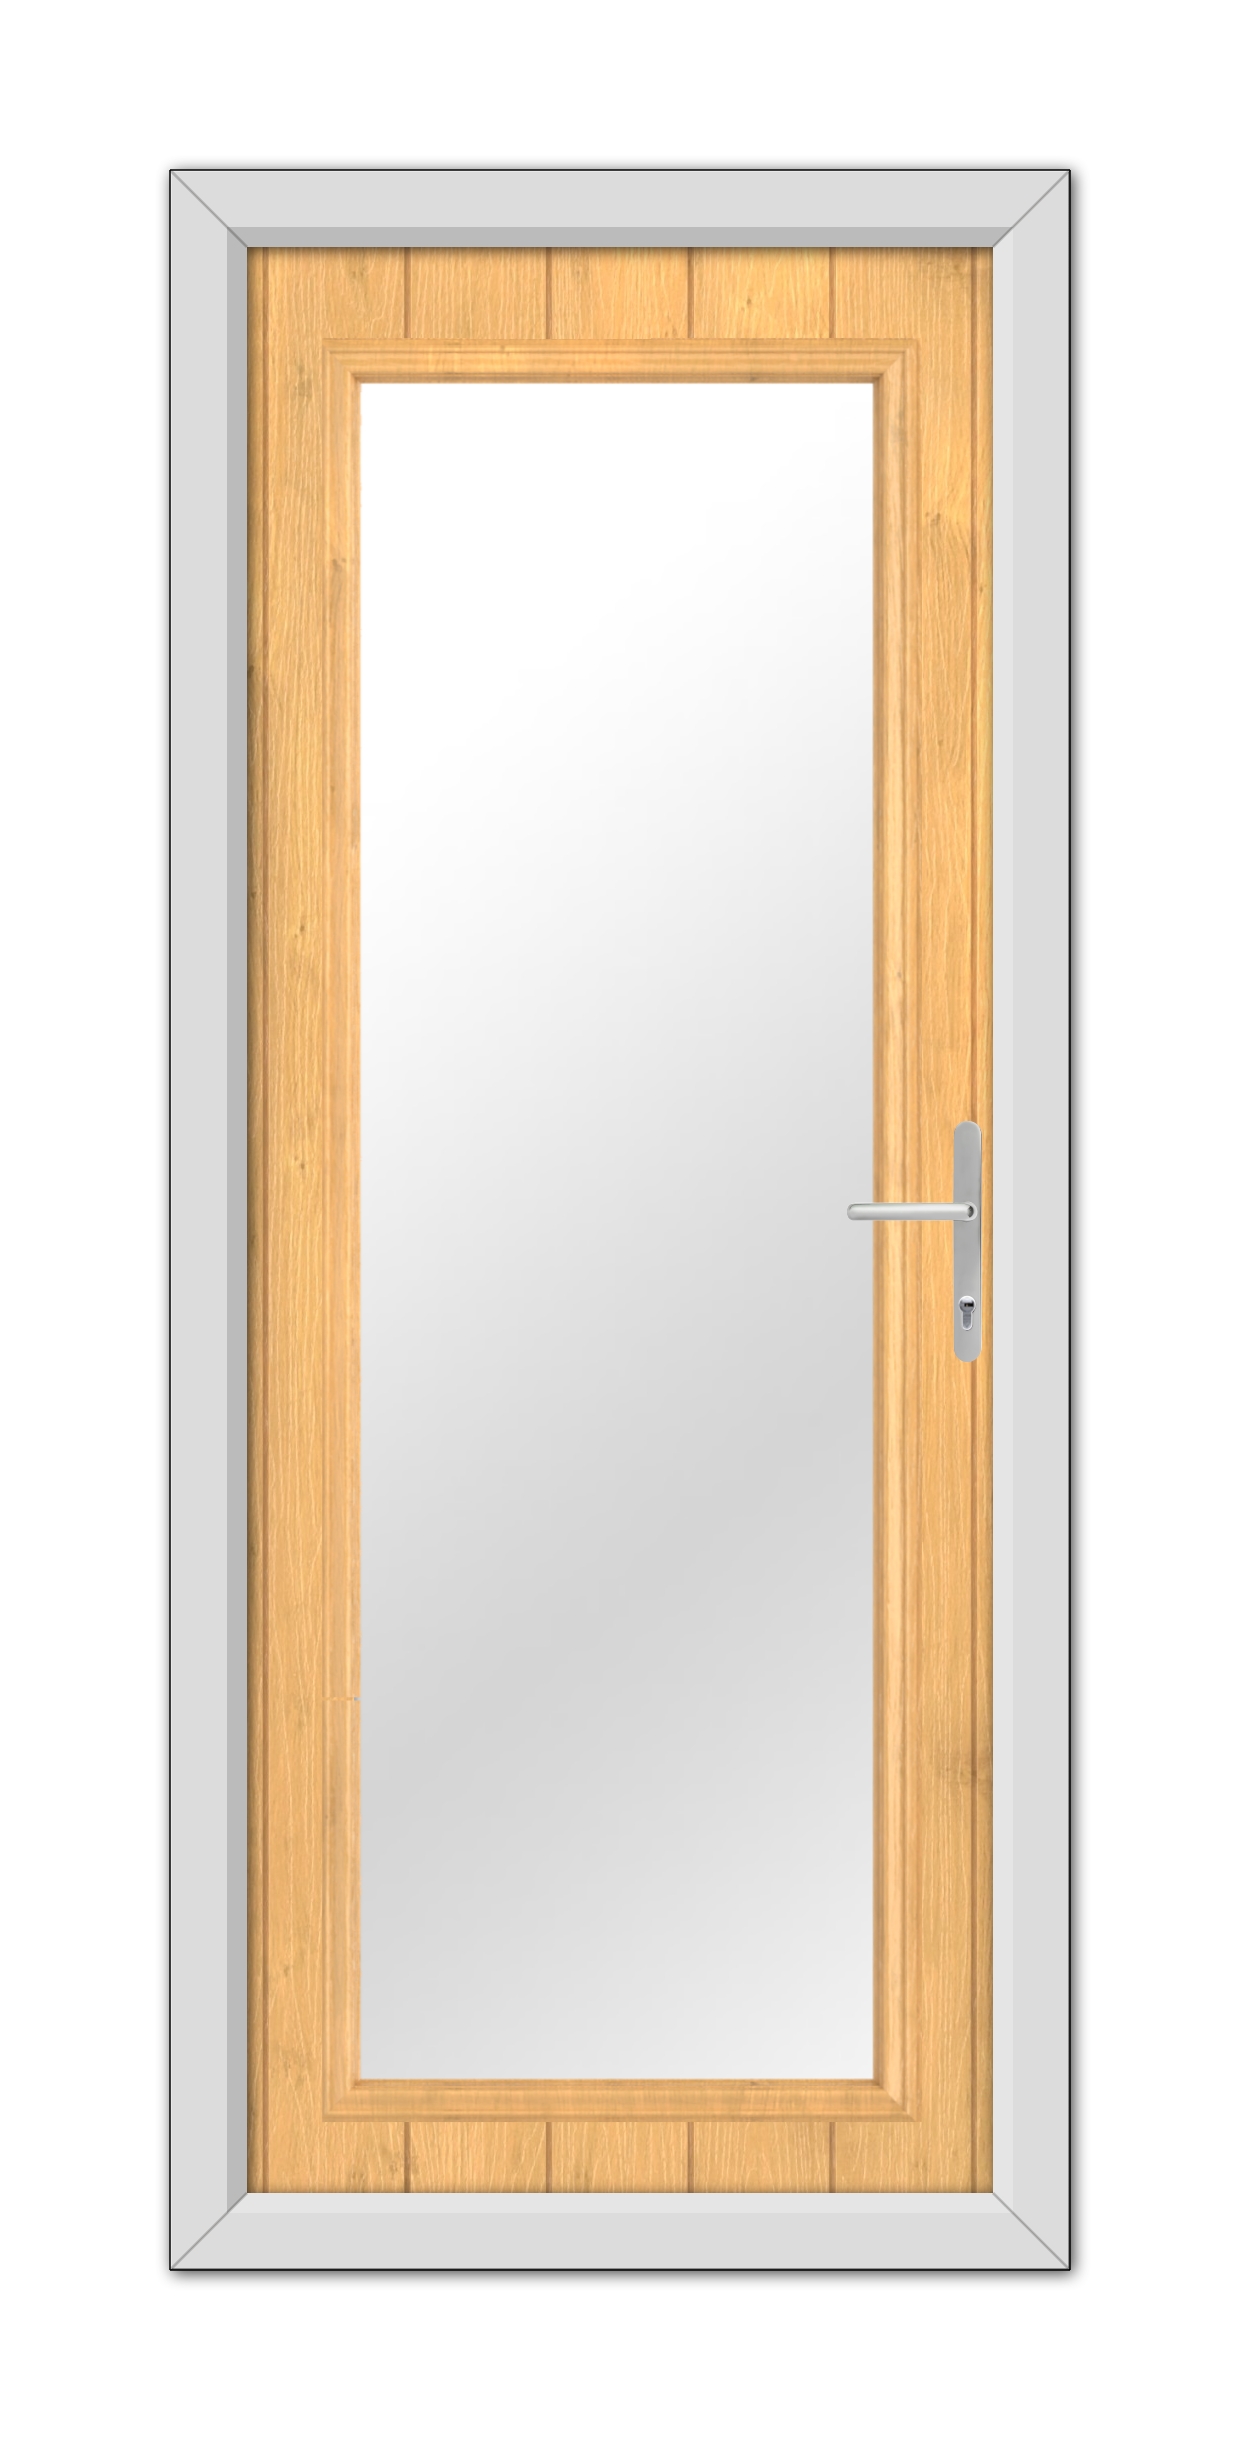 An Irish Oak Hatton Composite Door 48mm Timber Core with a metal handle, set in a gray metal frame, featuring a large rectangular glass panel.